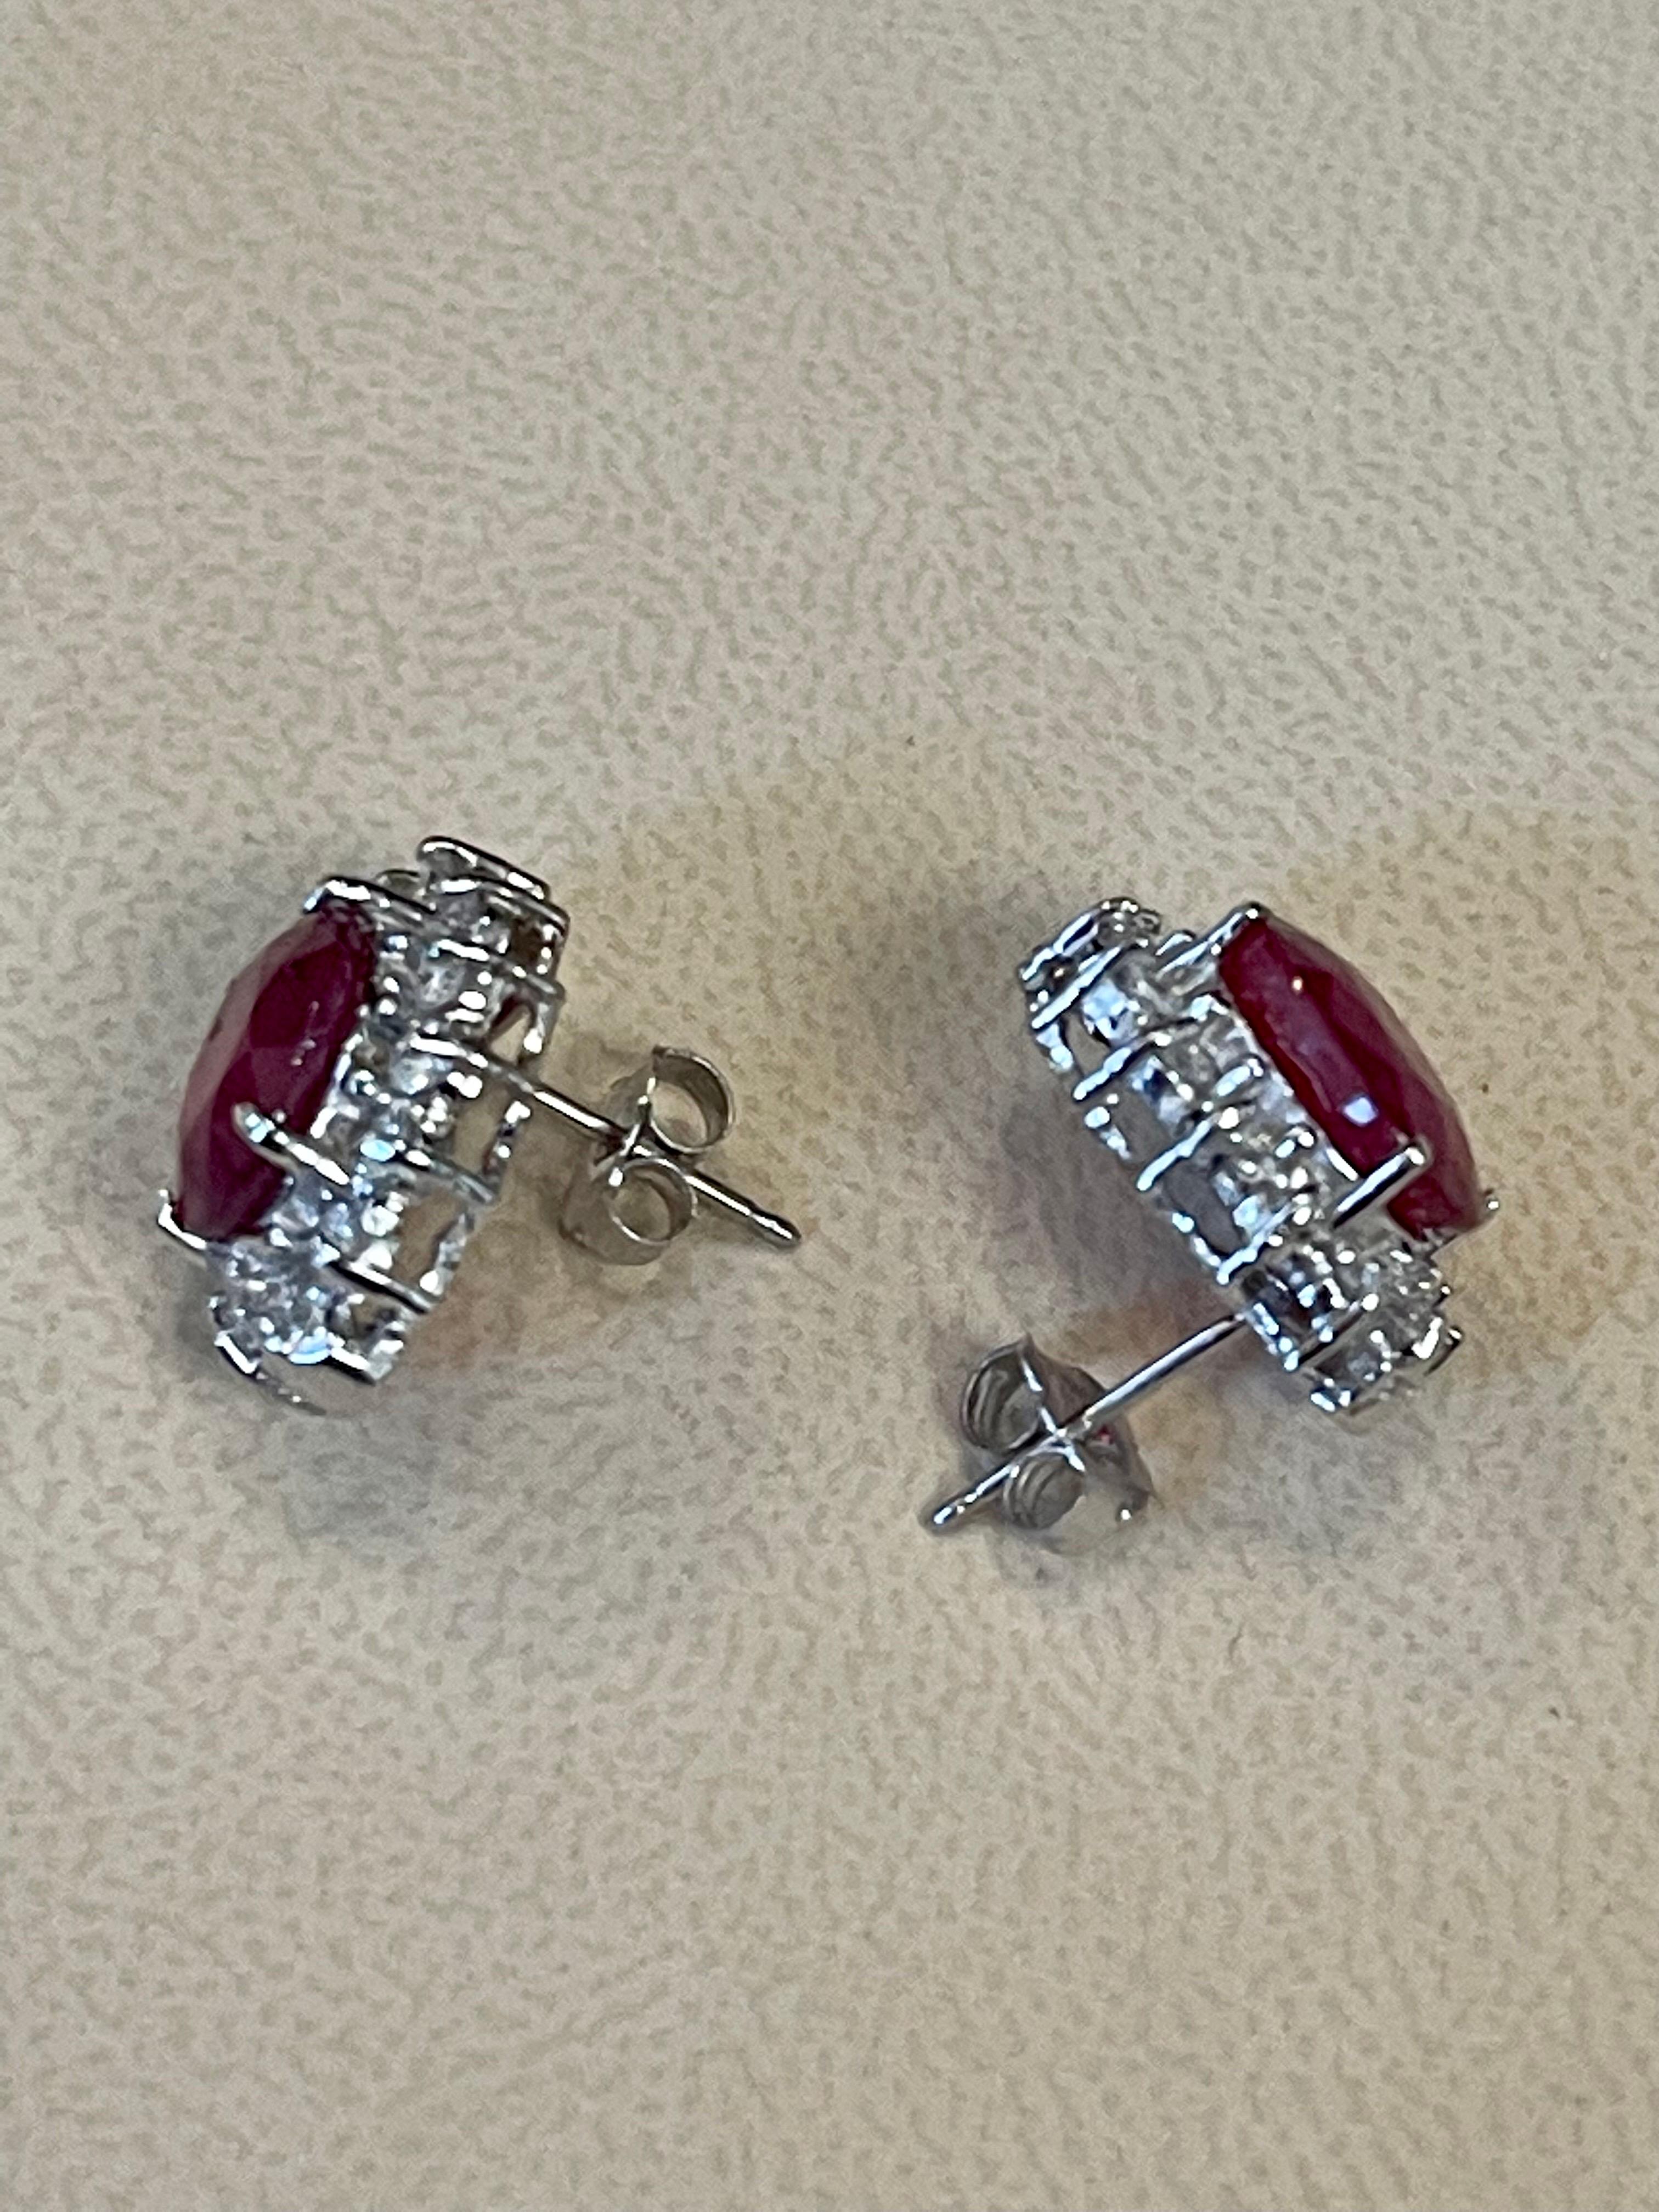 6 Carat Oval Treated Ruby & 1.2 Ct Diamond Stud Earrings 14 Karat White Gold In New Condition For Sale In New York, NY